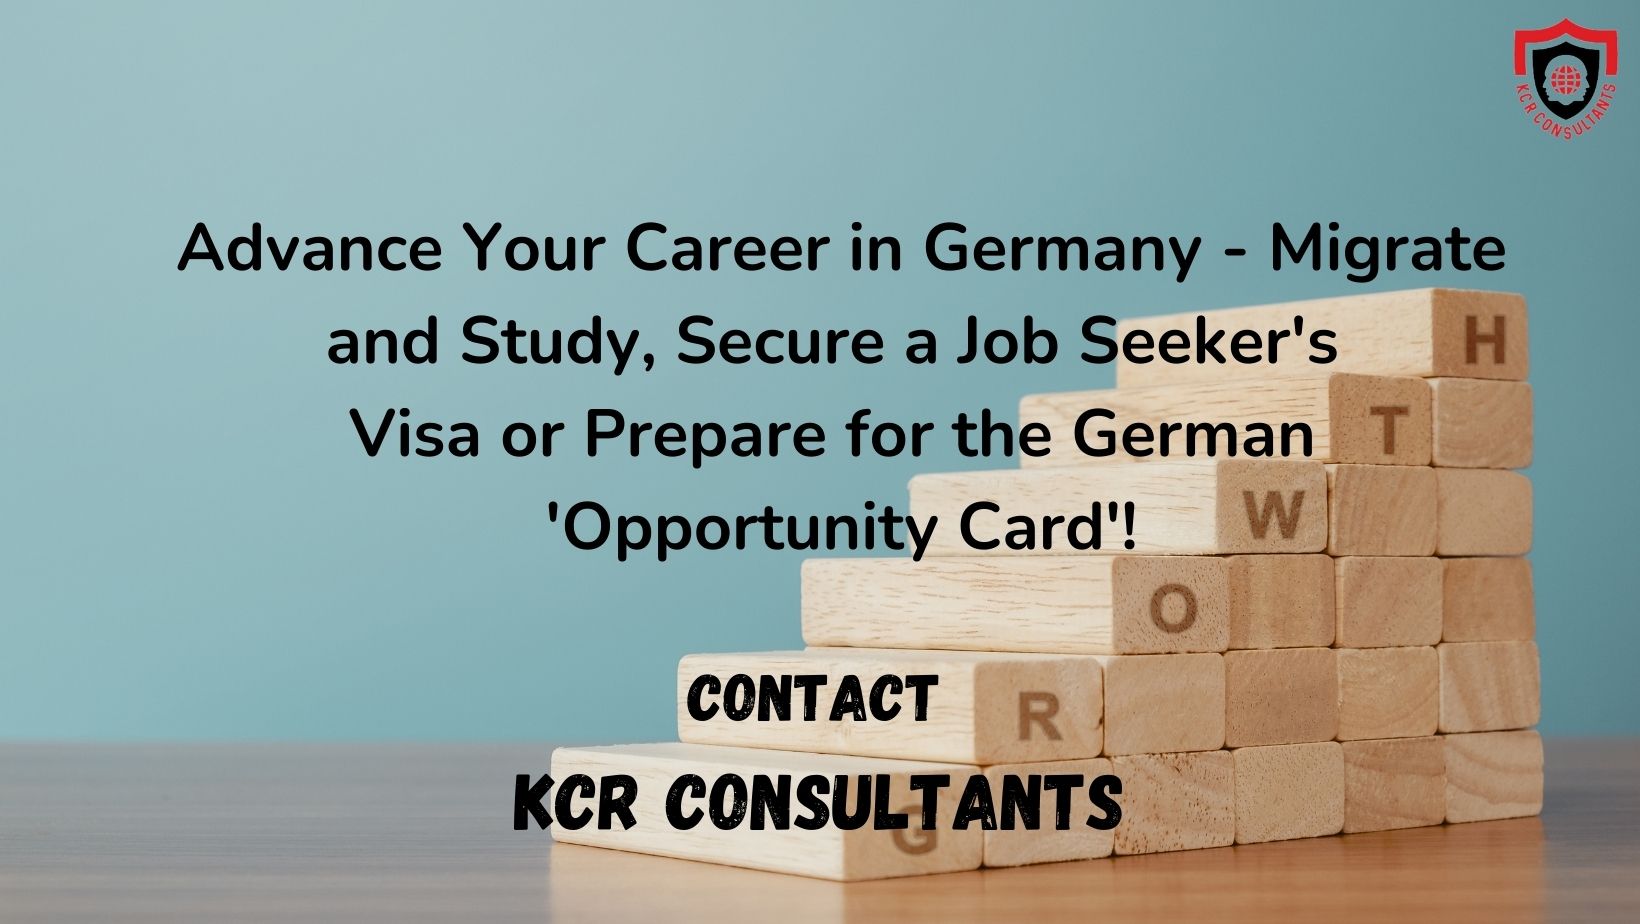 Green Jobs in Germany - KCR CONSULTANTS - Contact us